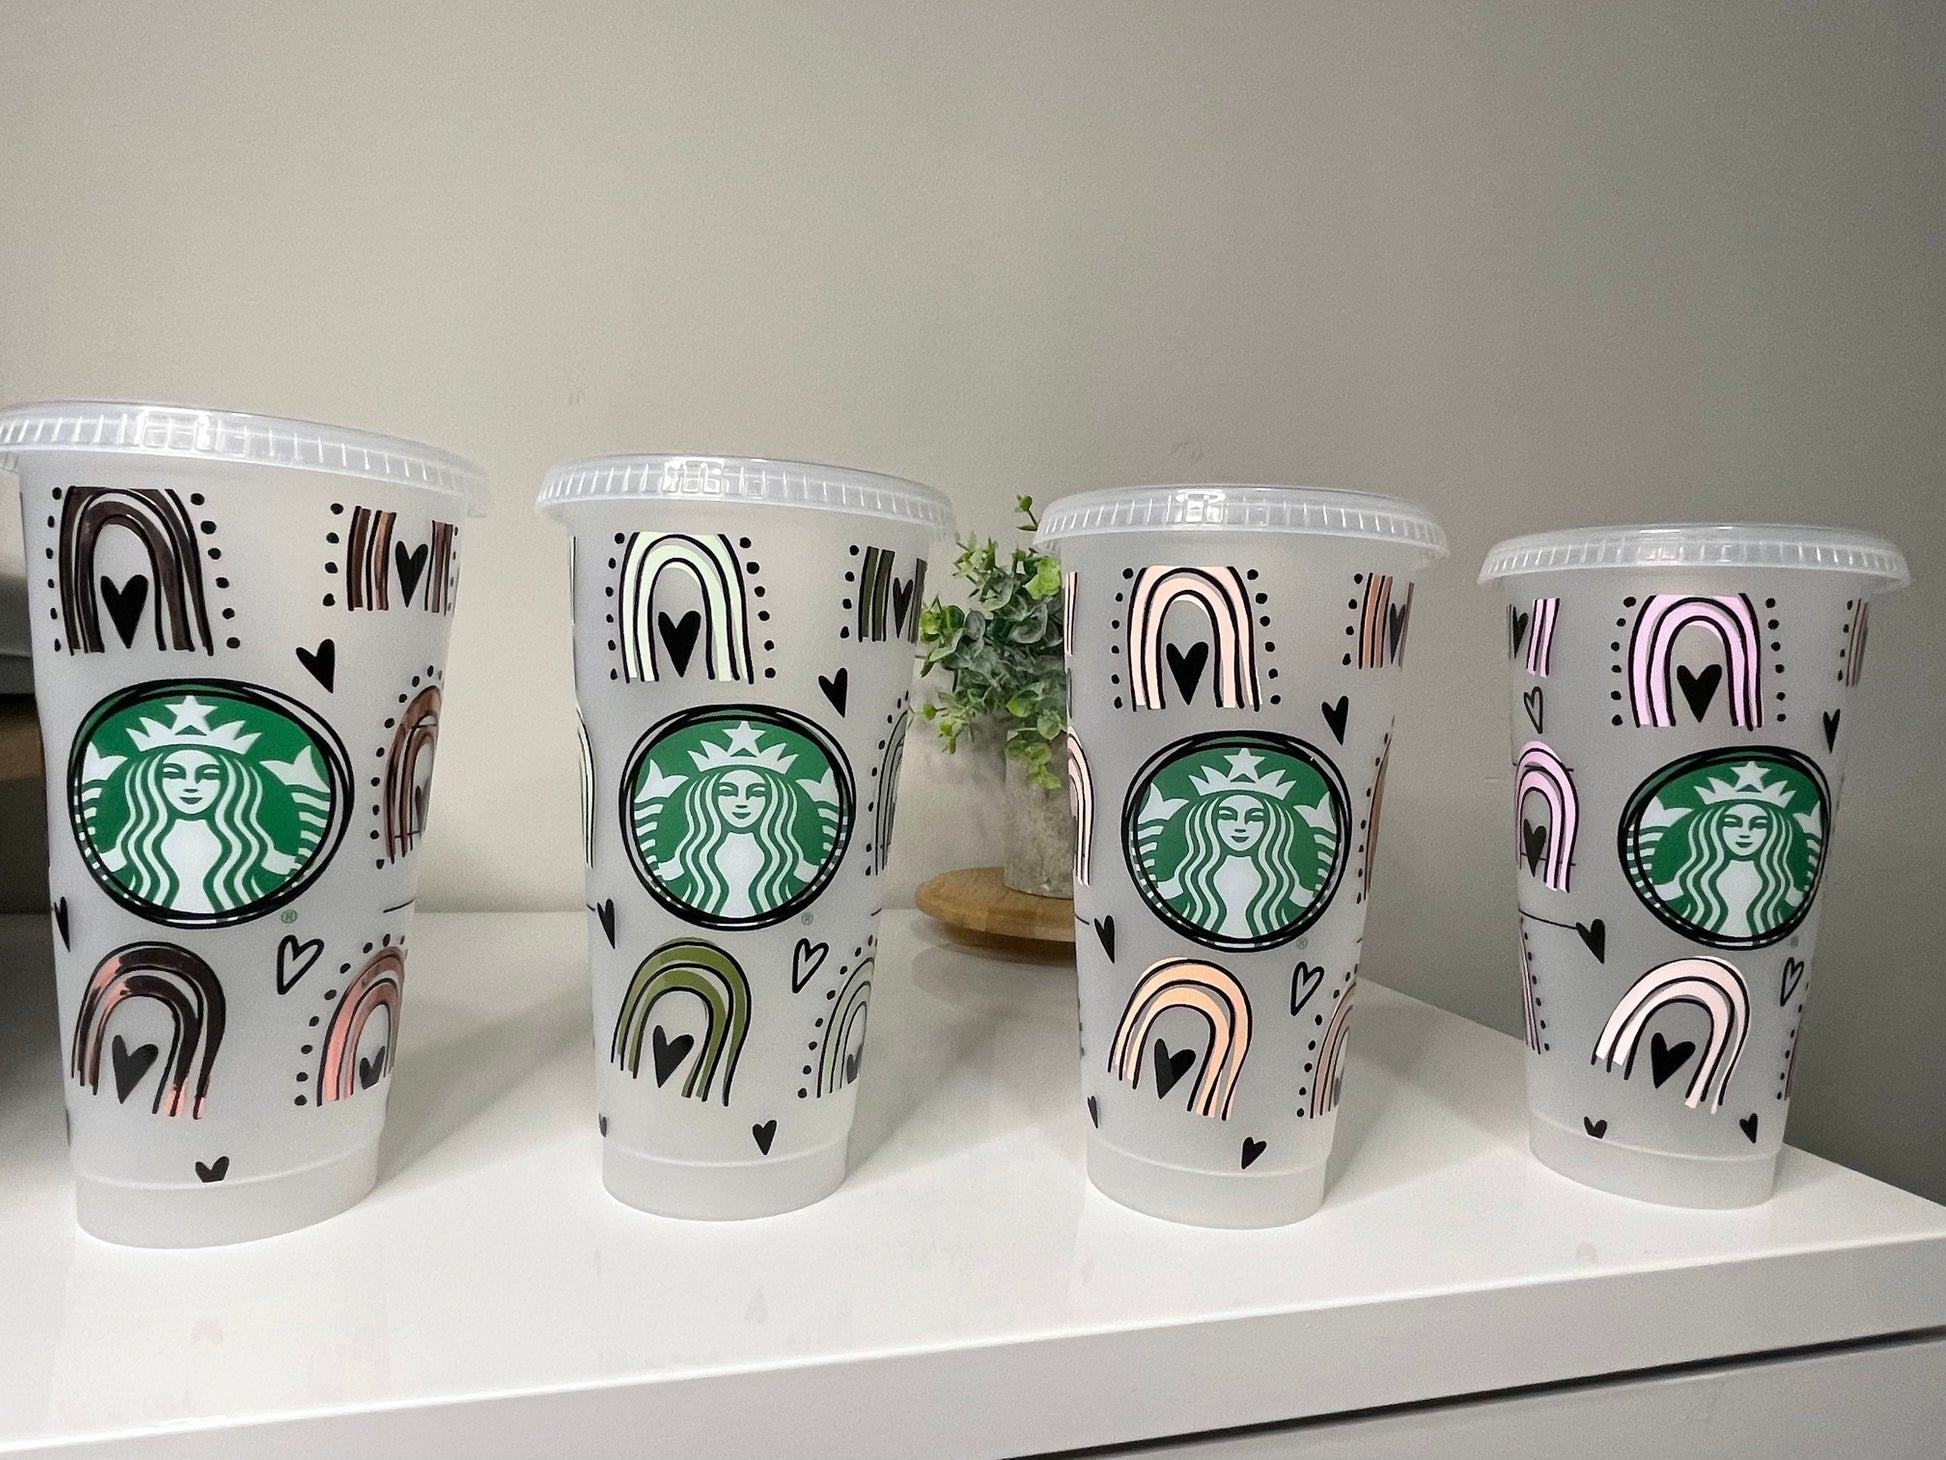 Starbucks Cold Cup, Personalized Starbucks Cup